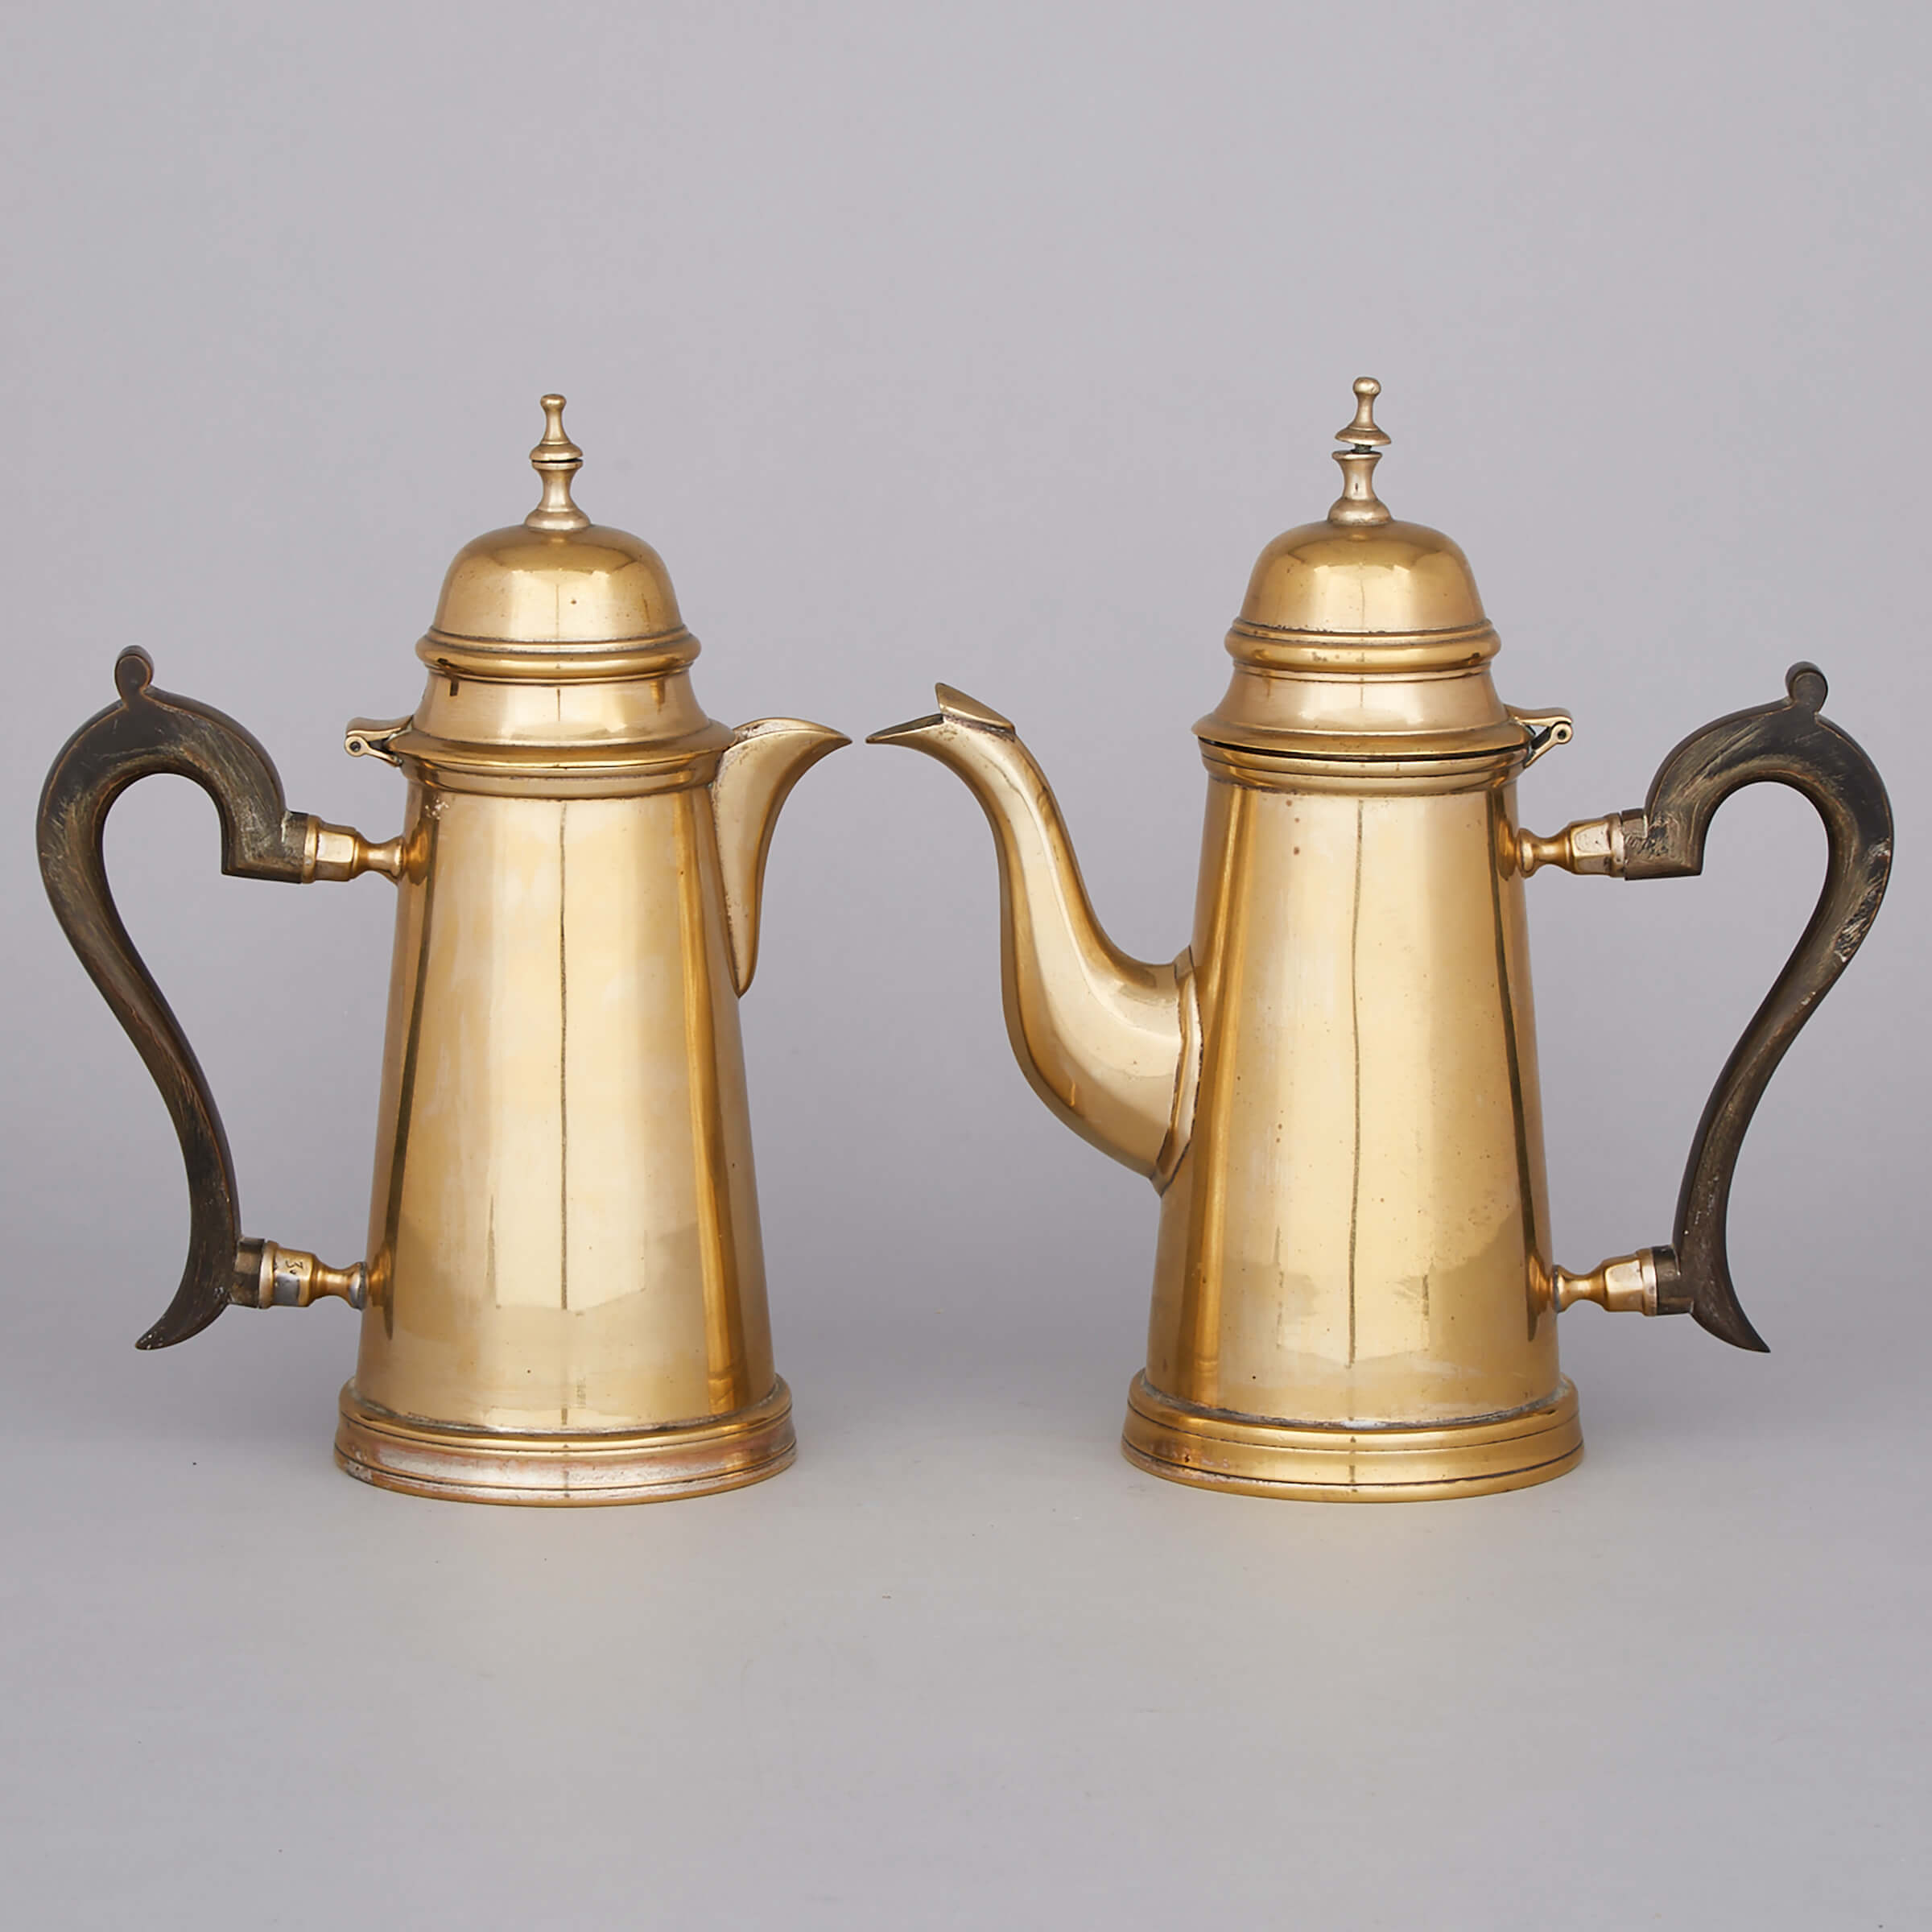 English Brass Coffee and Hot Water Pot, early 19th century